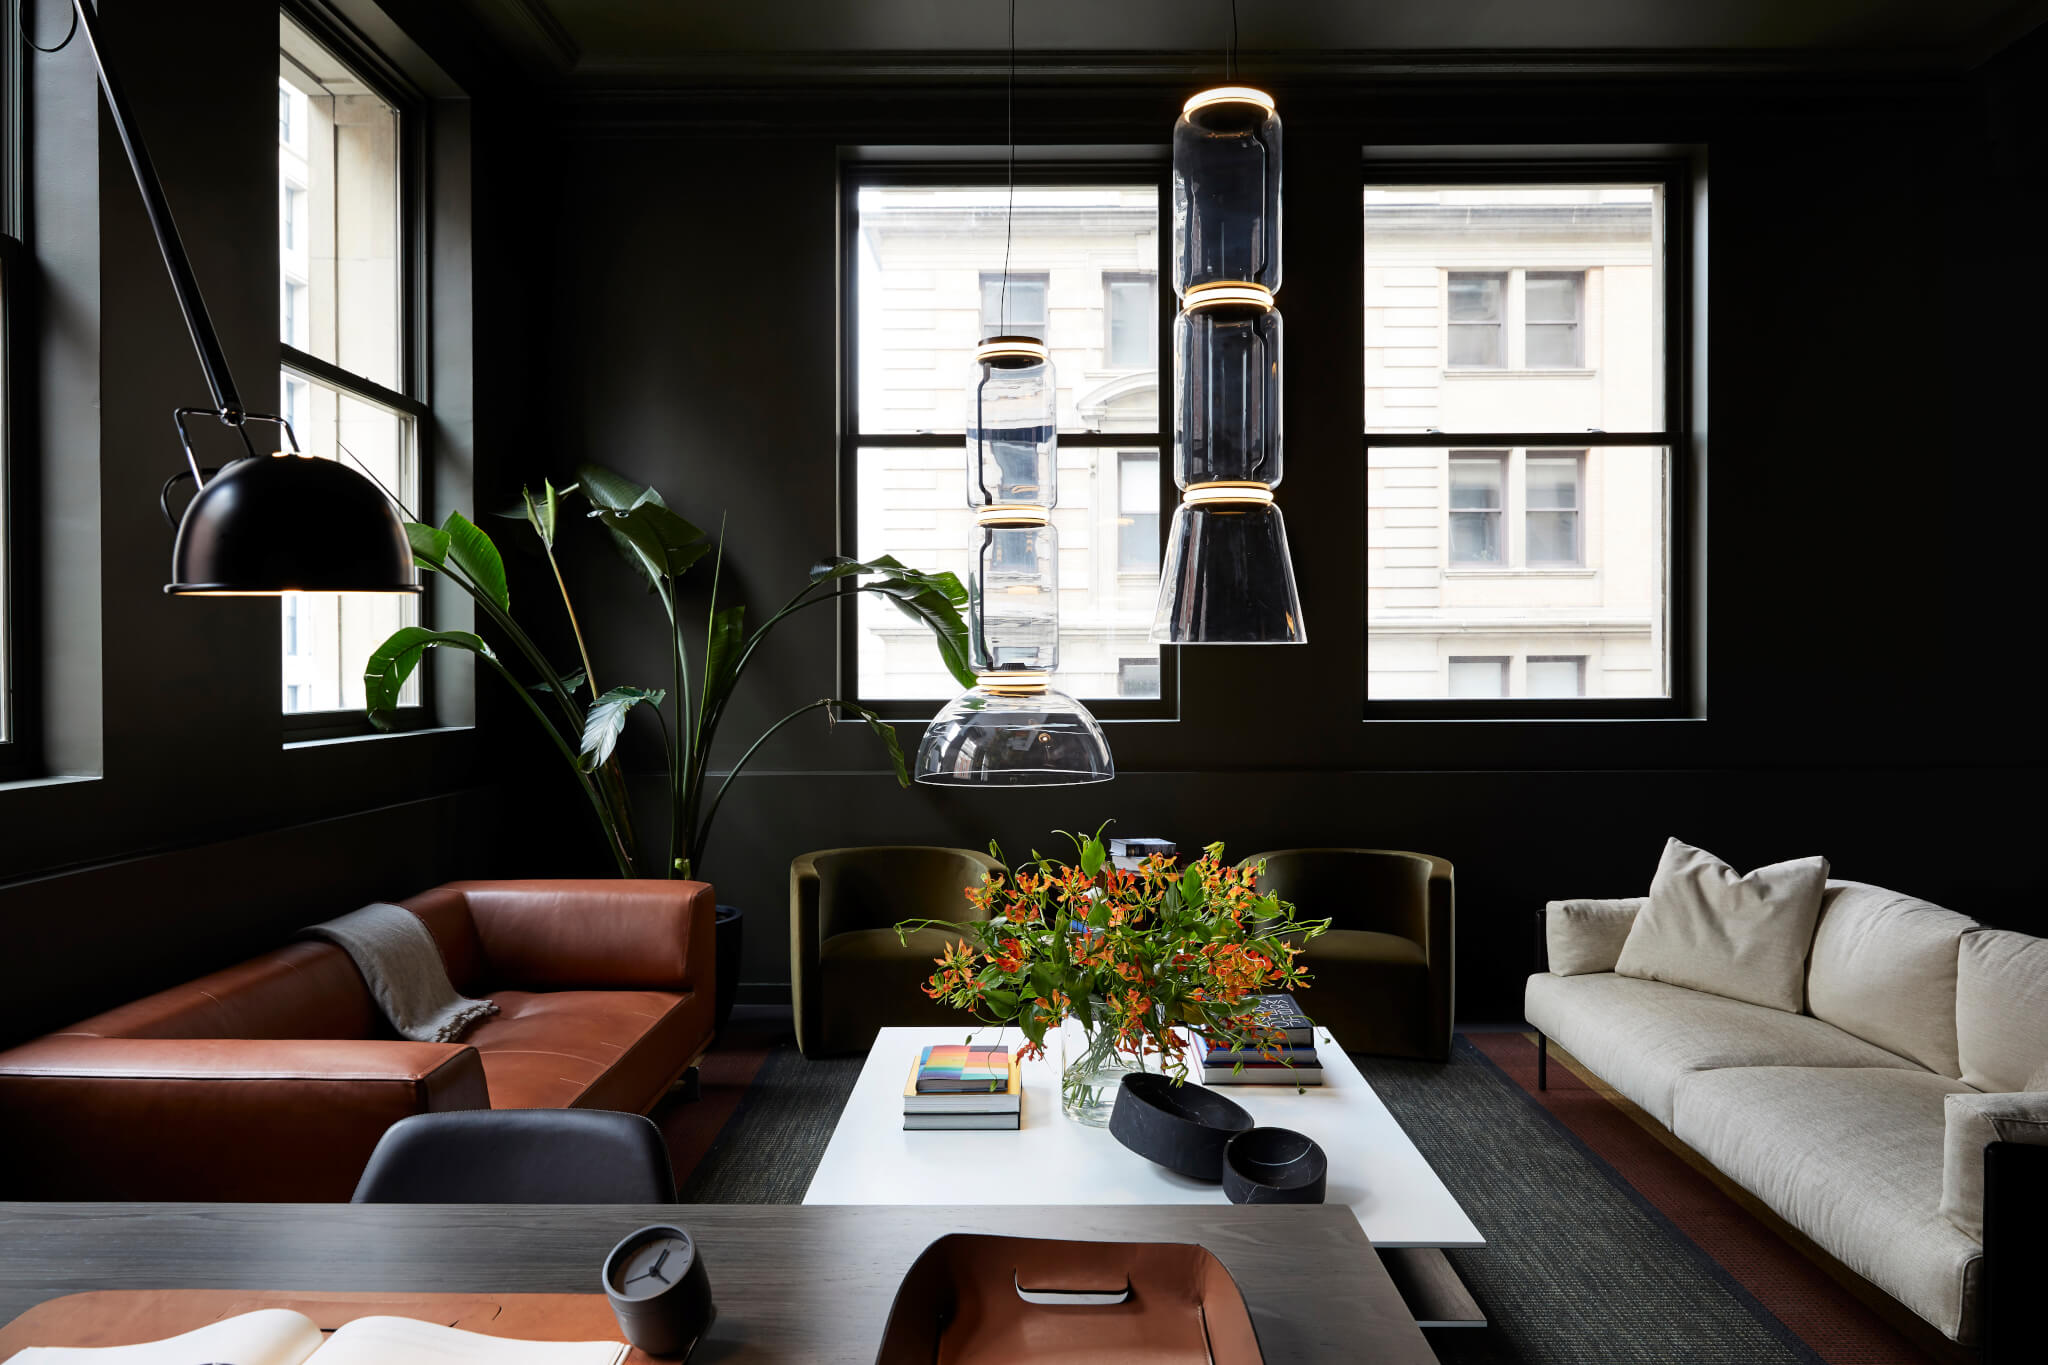 dark painted walls with leather furnishings